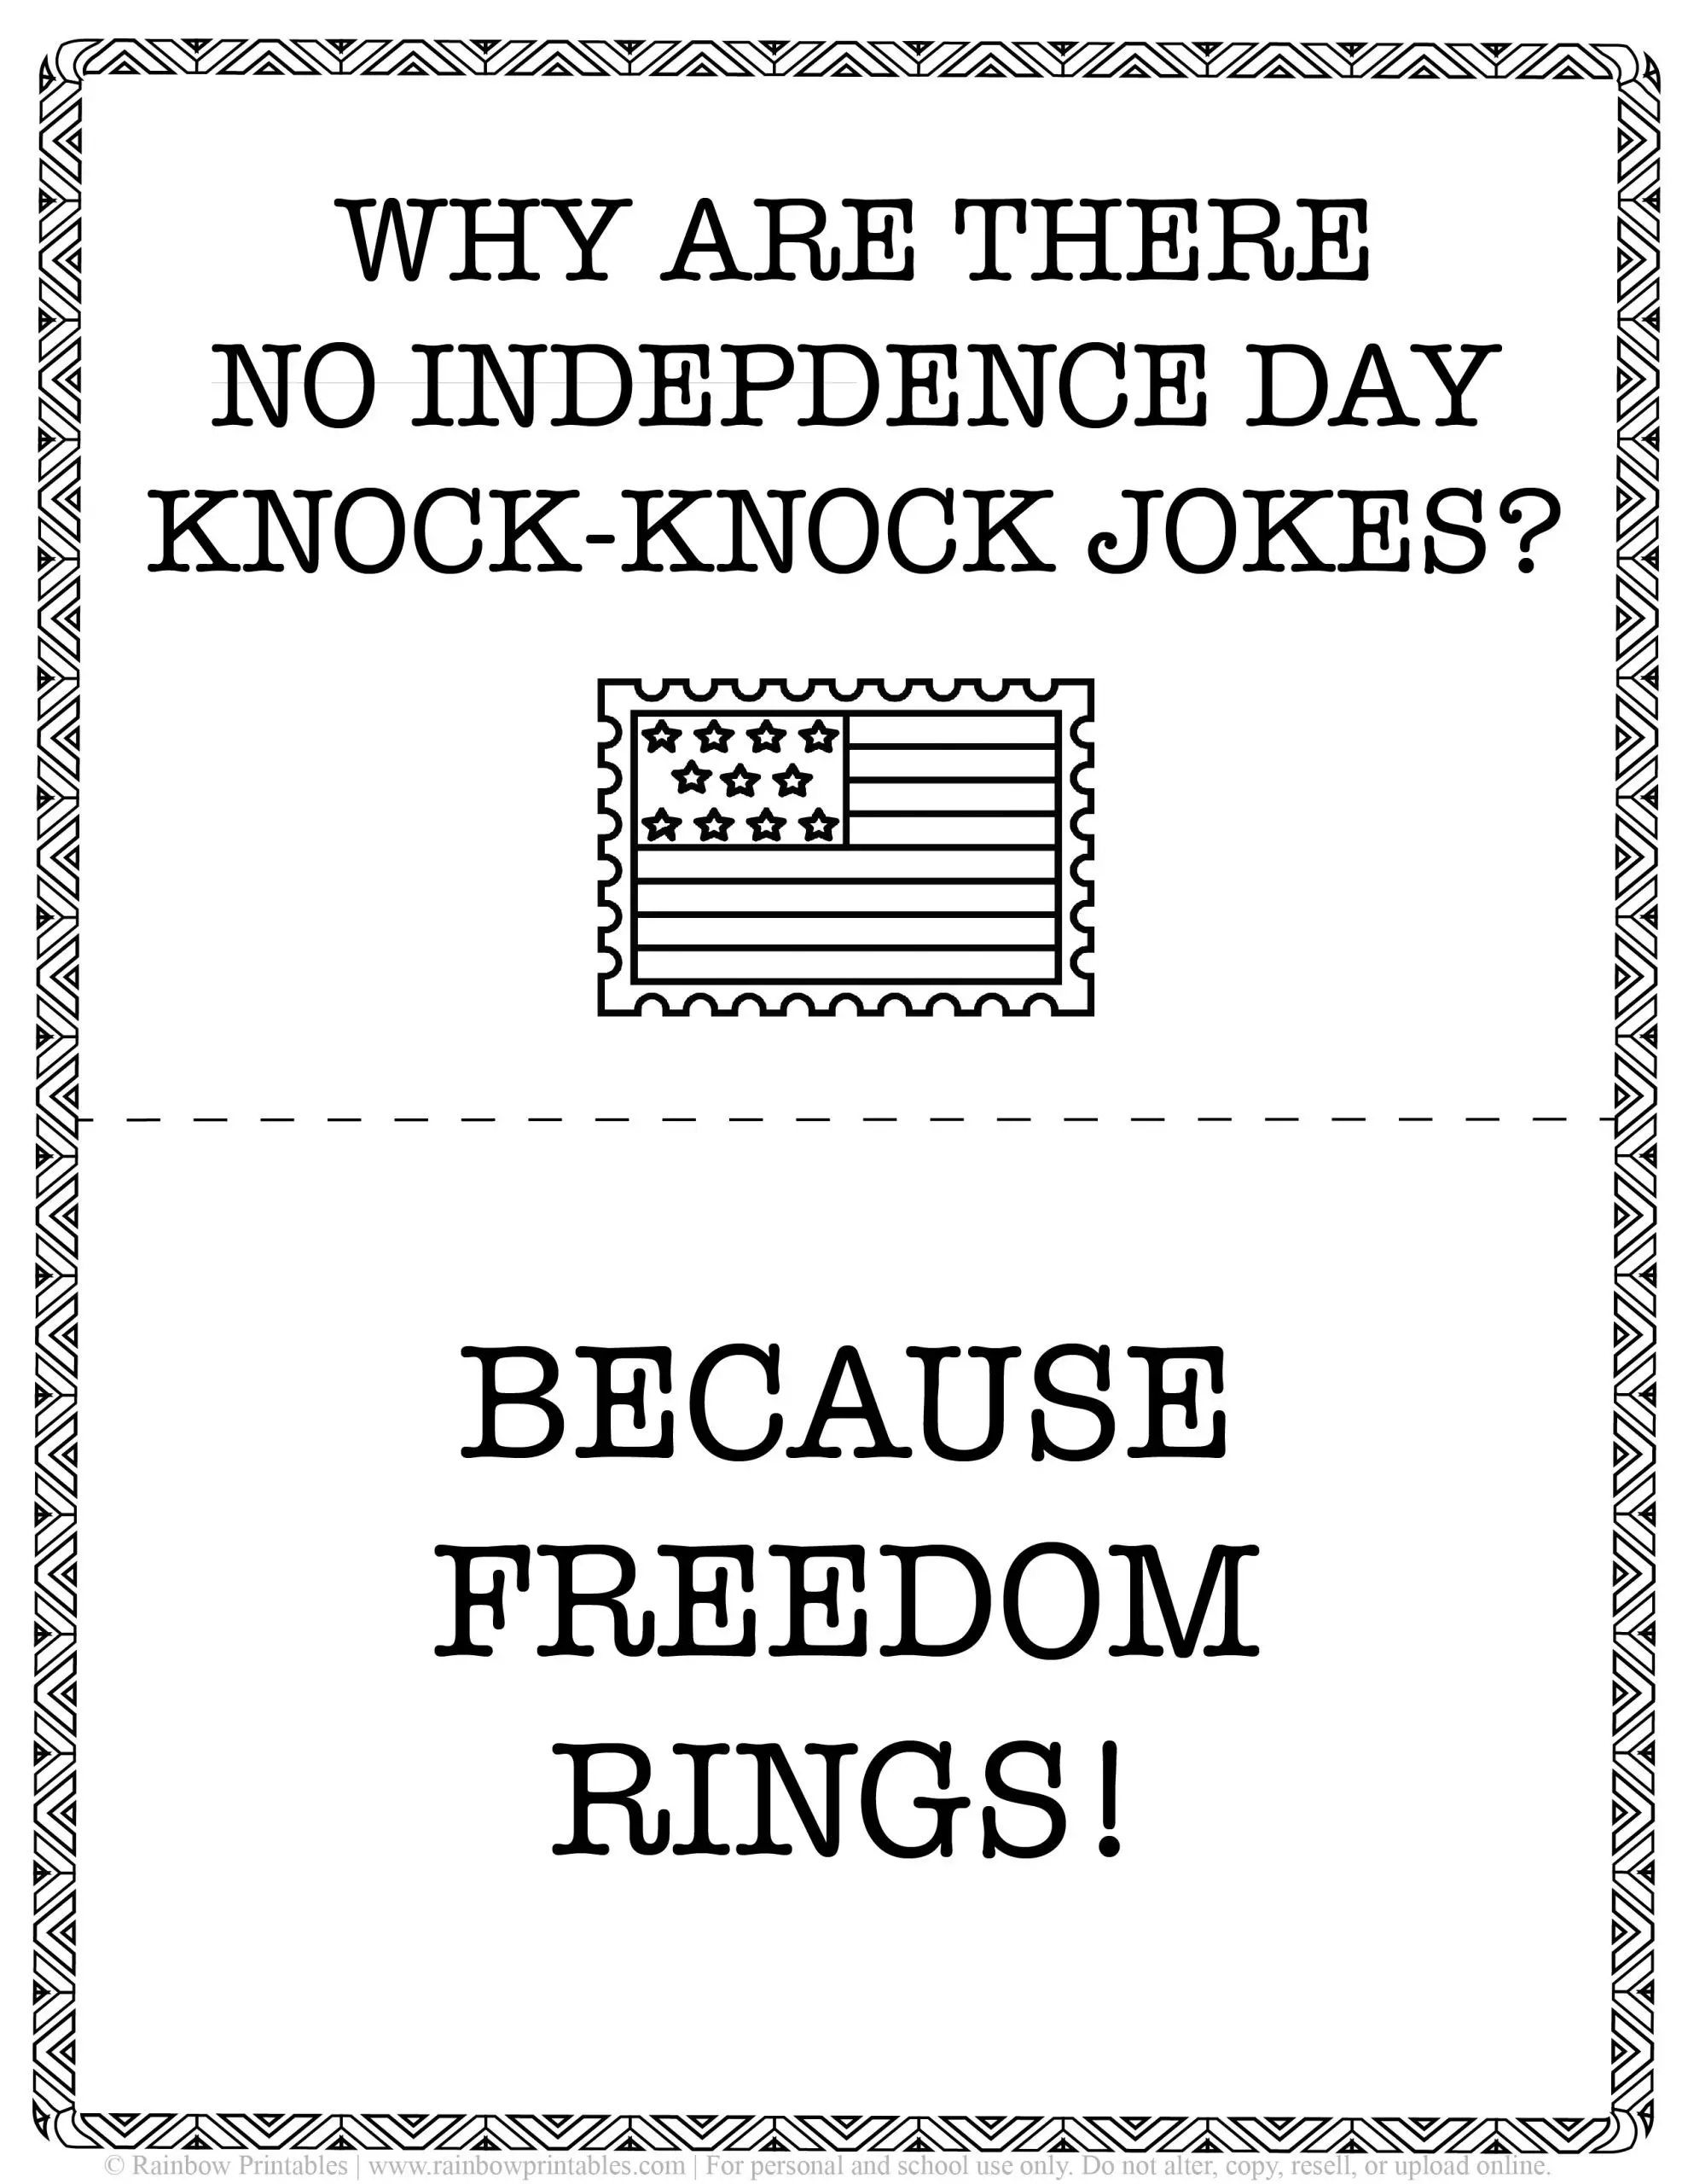 Kids Patriotic July 4th independence Day America Printables Eagle Puns Jokes for Children, Toddlers, Coloring, Activity for Preschool Freedom Rings Jokes